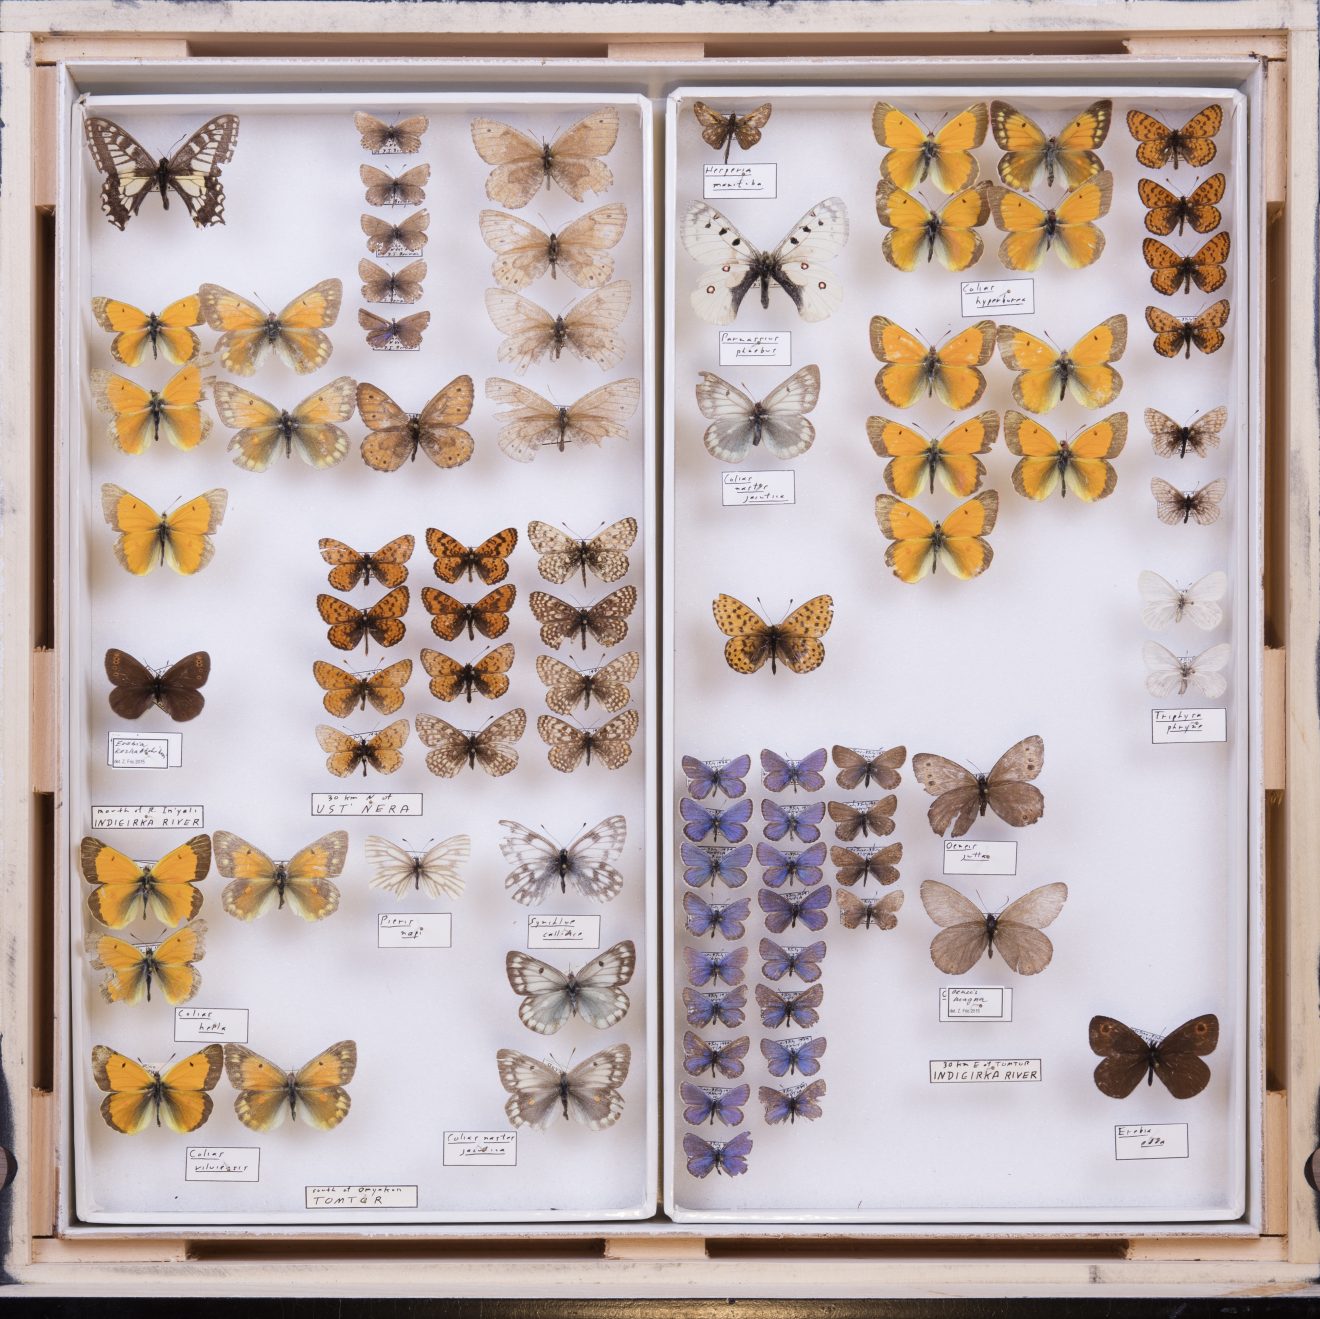 A photo of Russian butterfly specimens from Yakutia, Republic Sakha, Indigirka River, in Kenelm Philip's vast collection. Nina Sikes photo